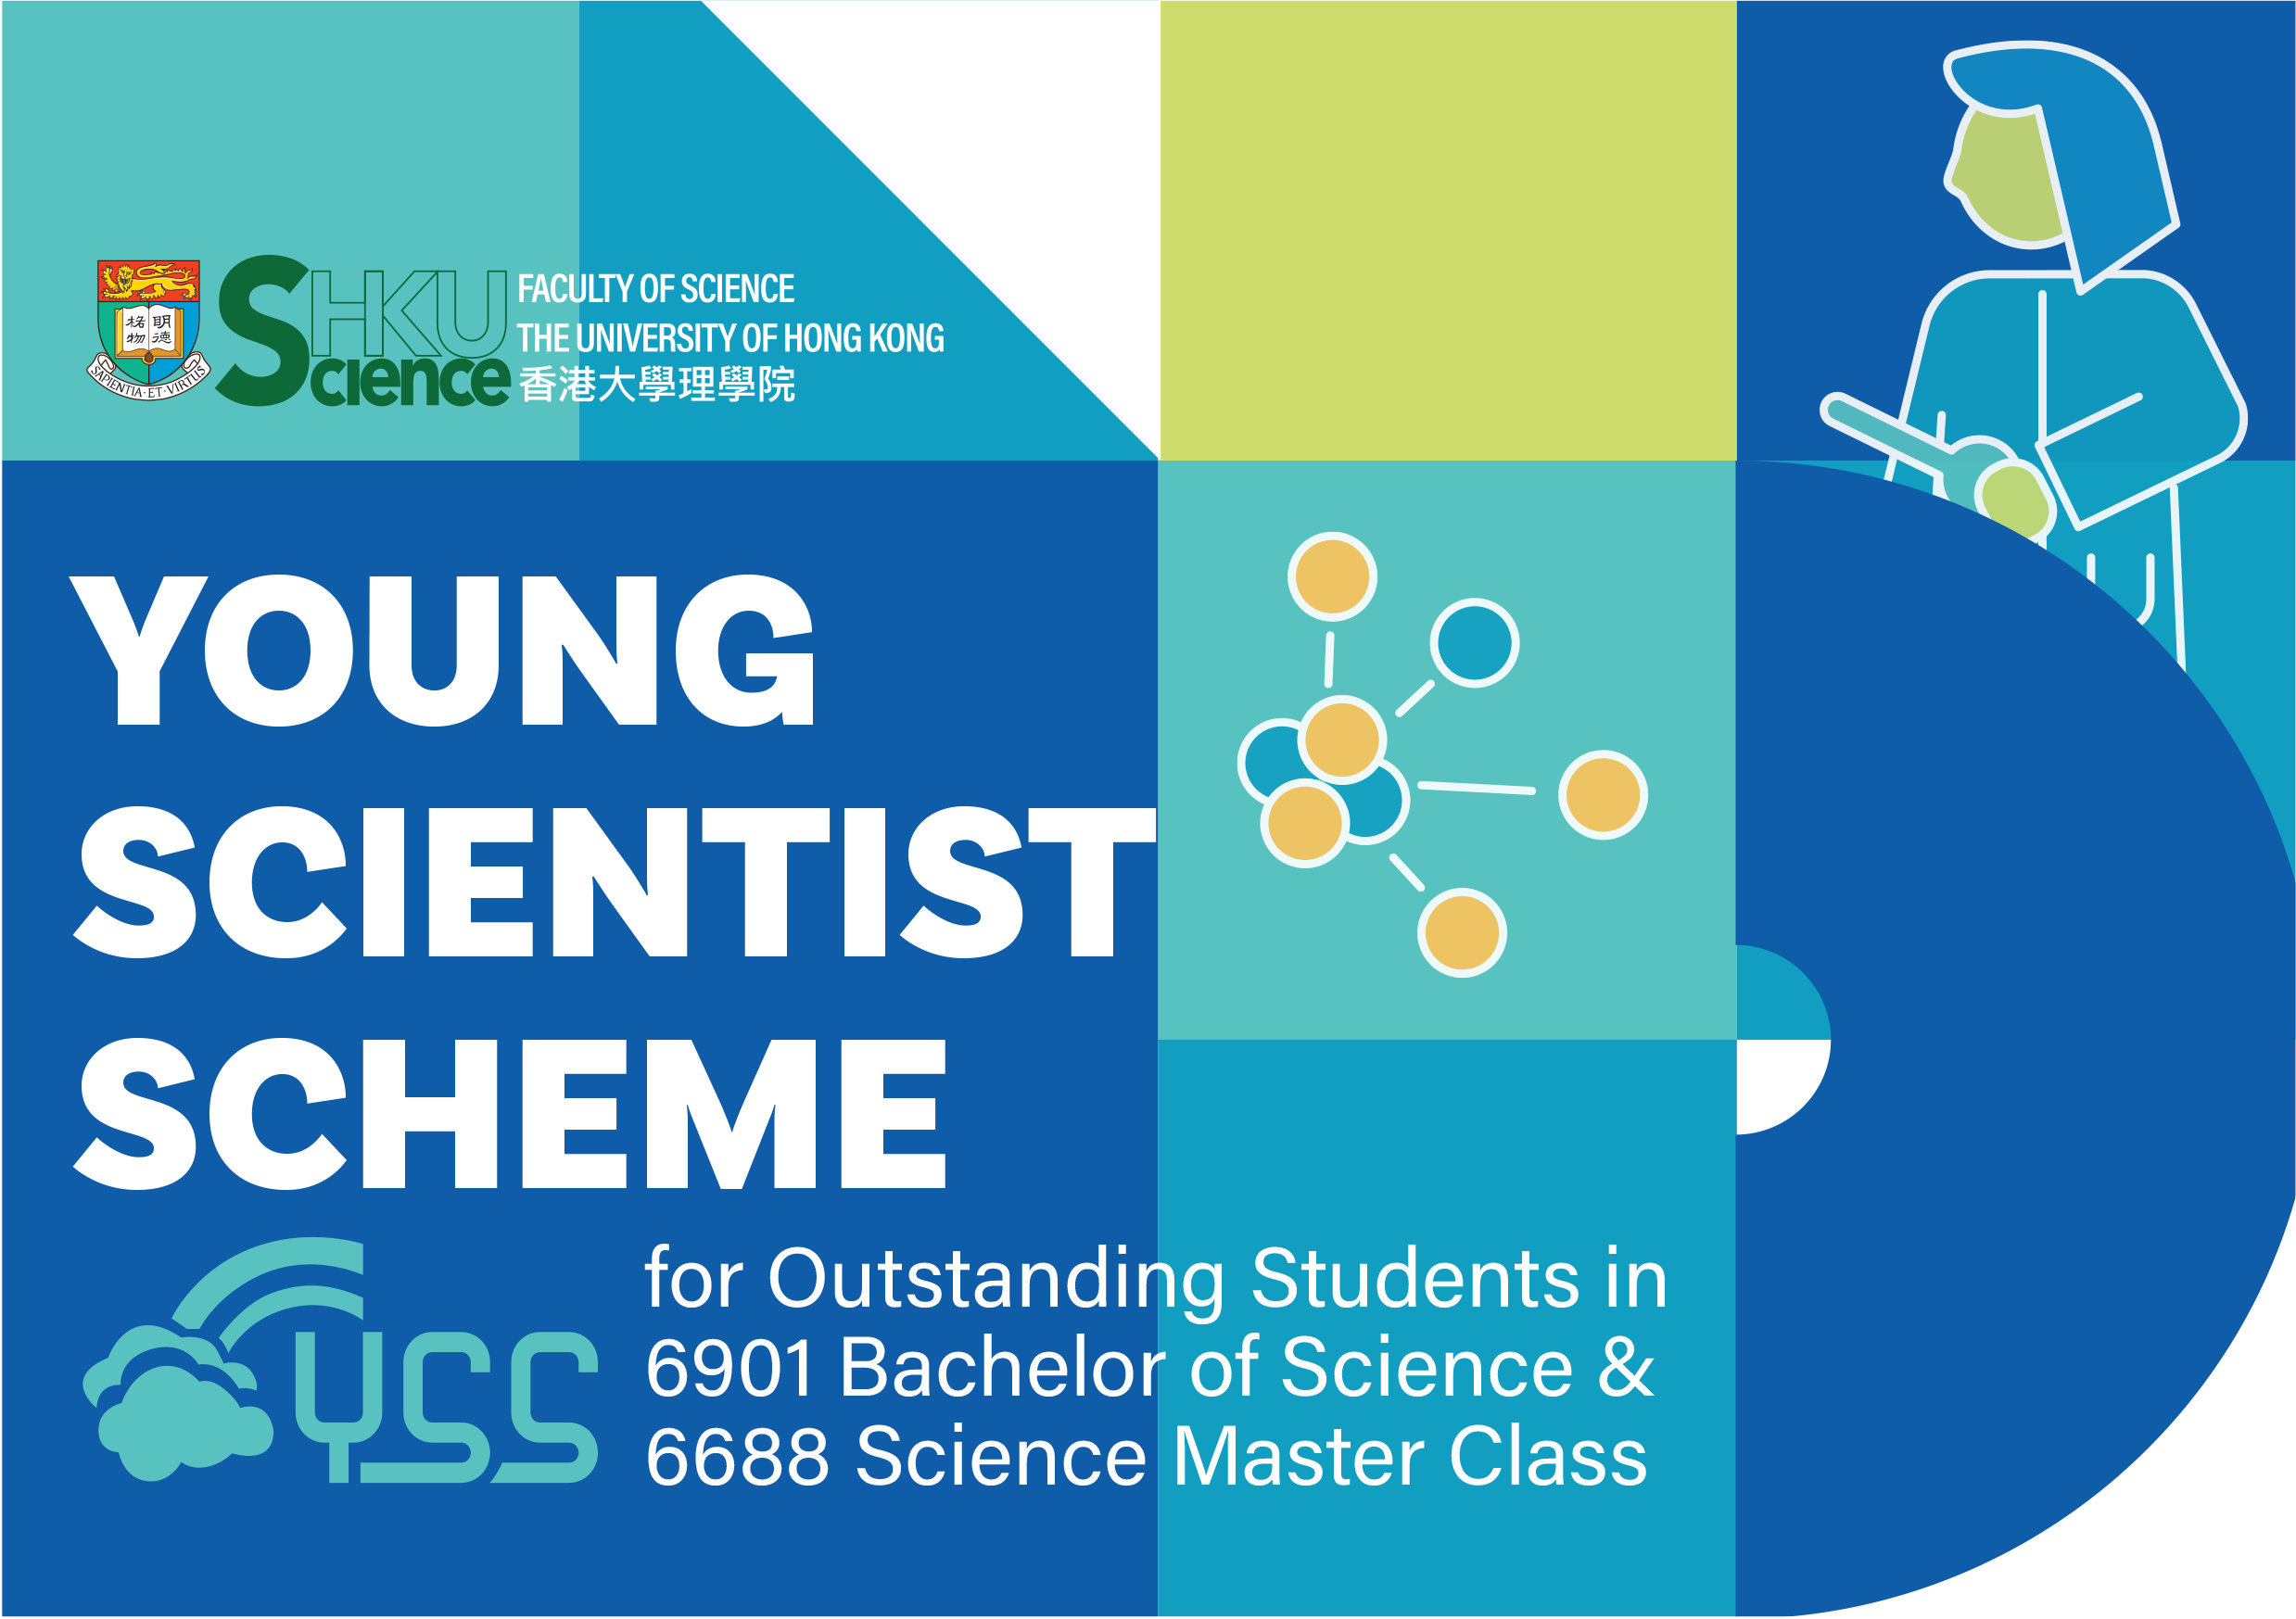 Young Scientist Scheme (YSS) for Outstanding Students